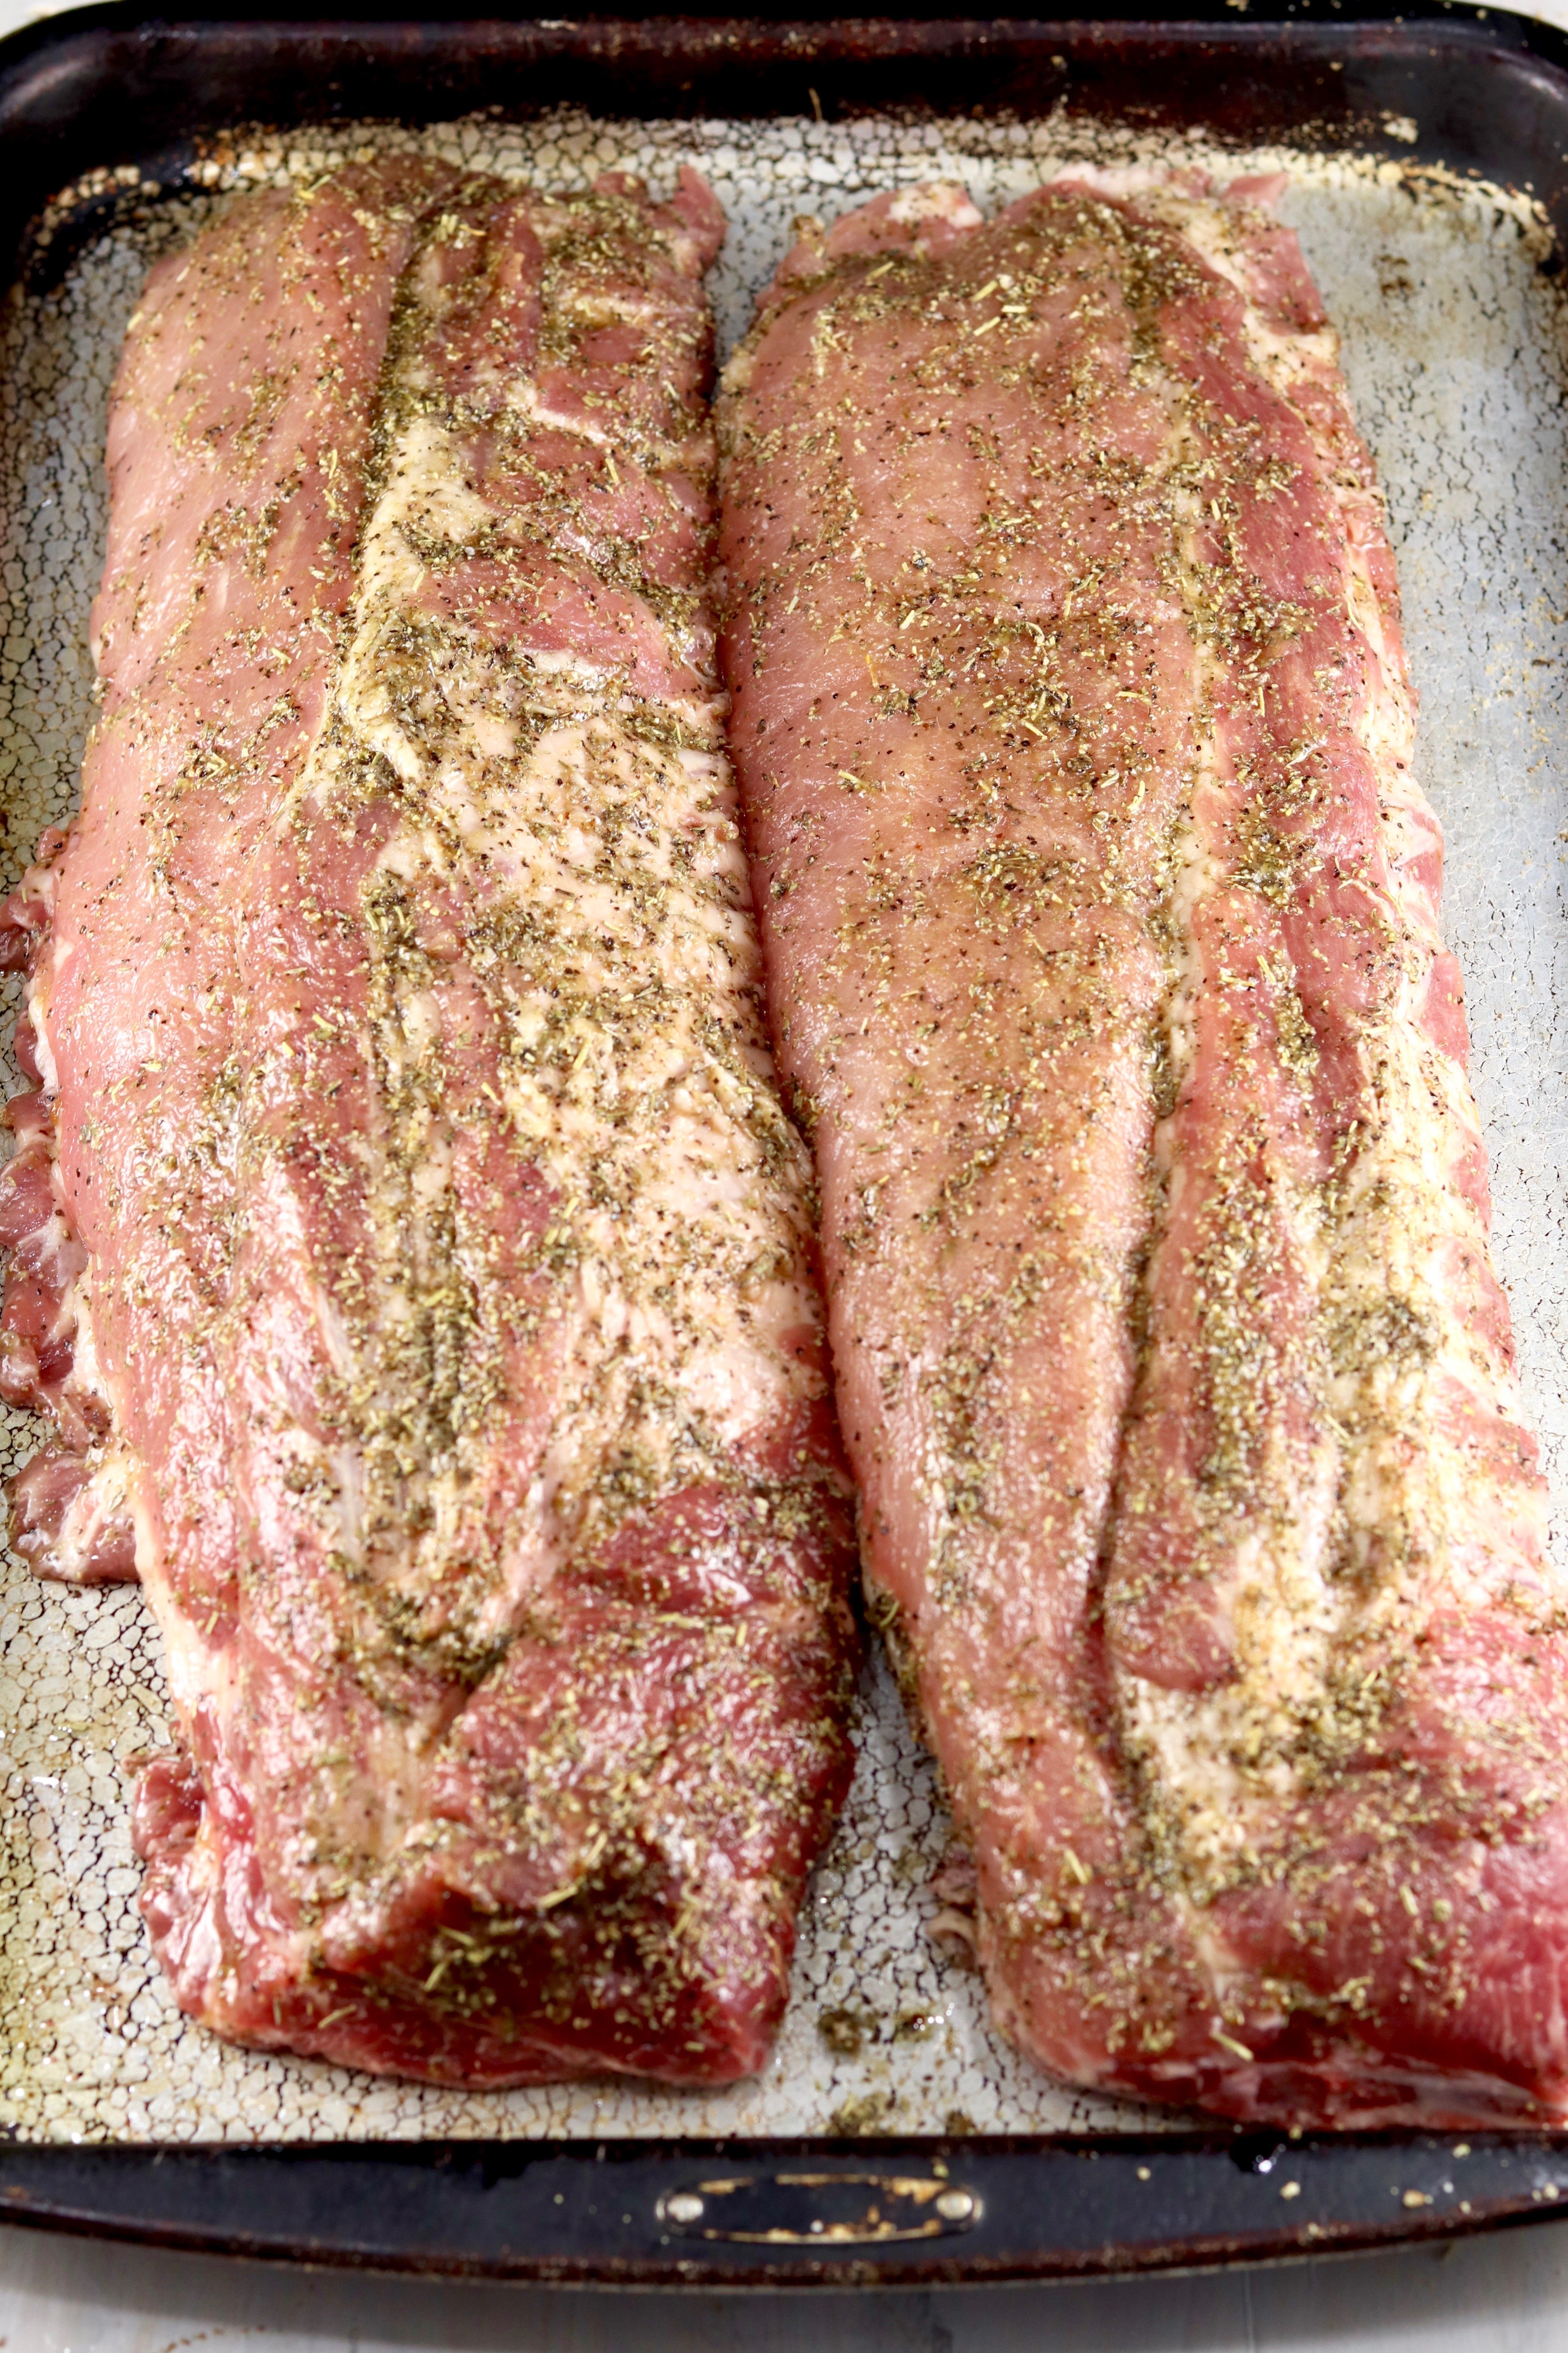 Baby Back Ribs seasoned with garlic and herb dry rub ready for the grill